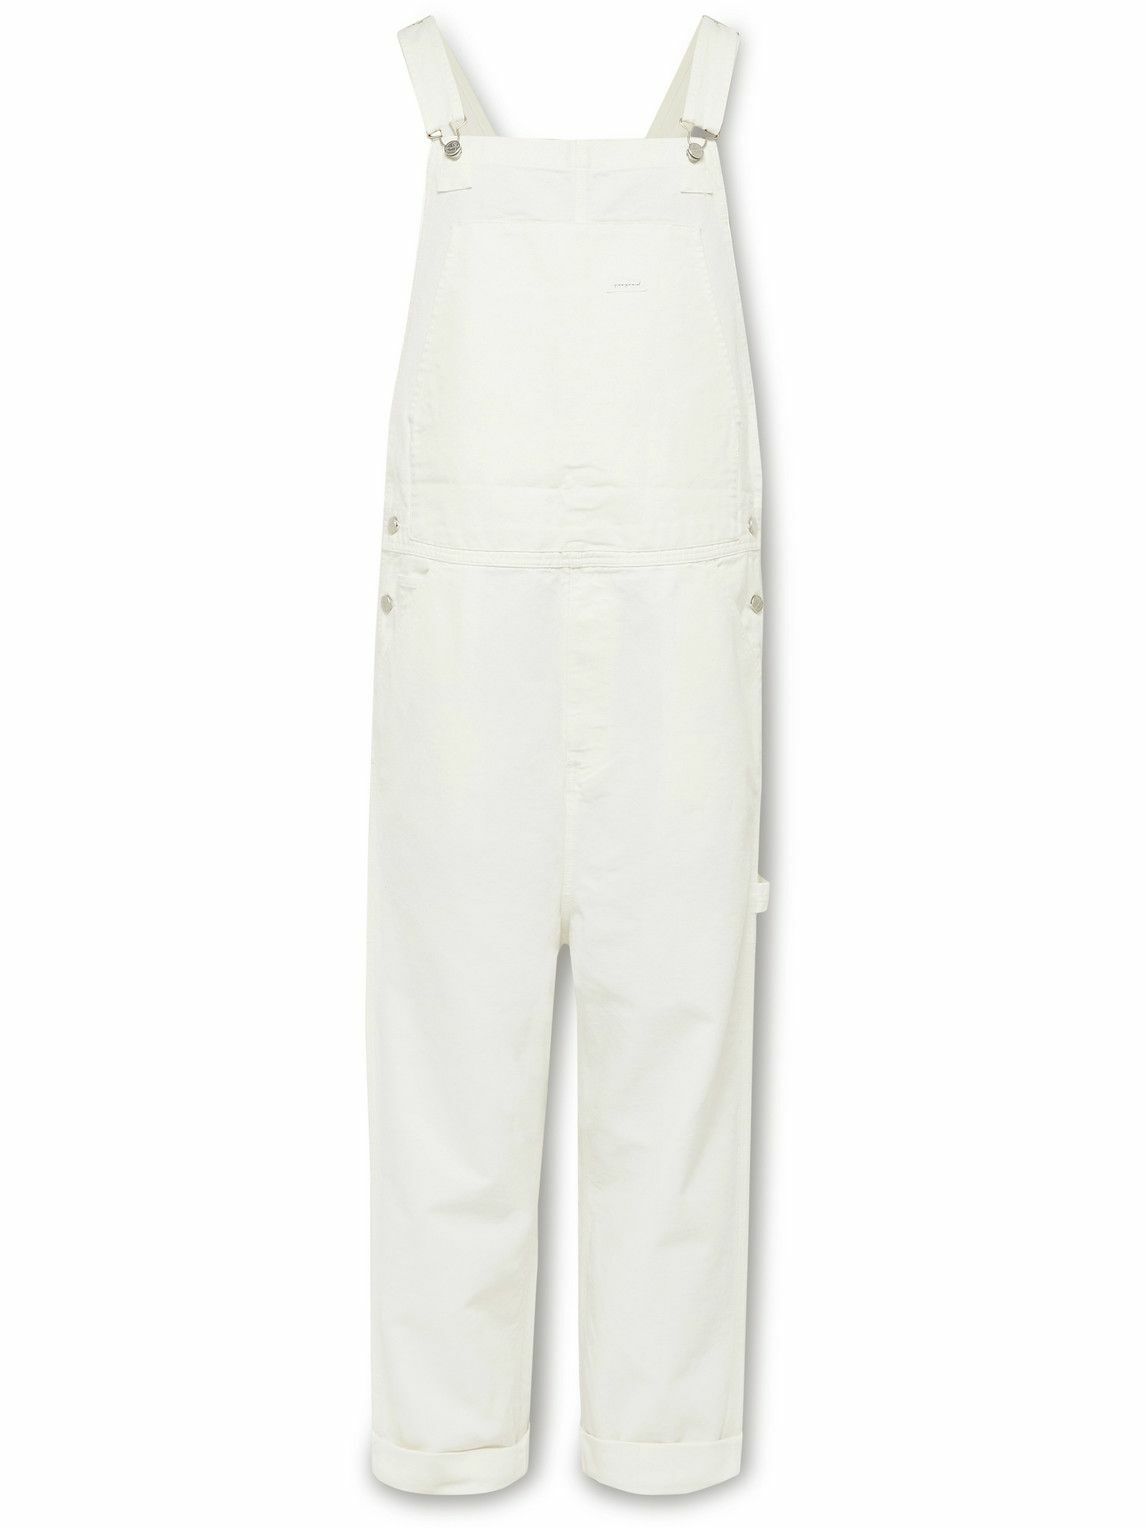 Overalls & Jumpsuits | Search CLOTHBASE